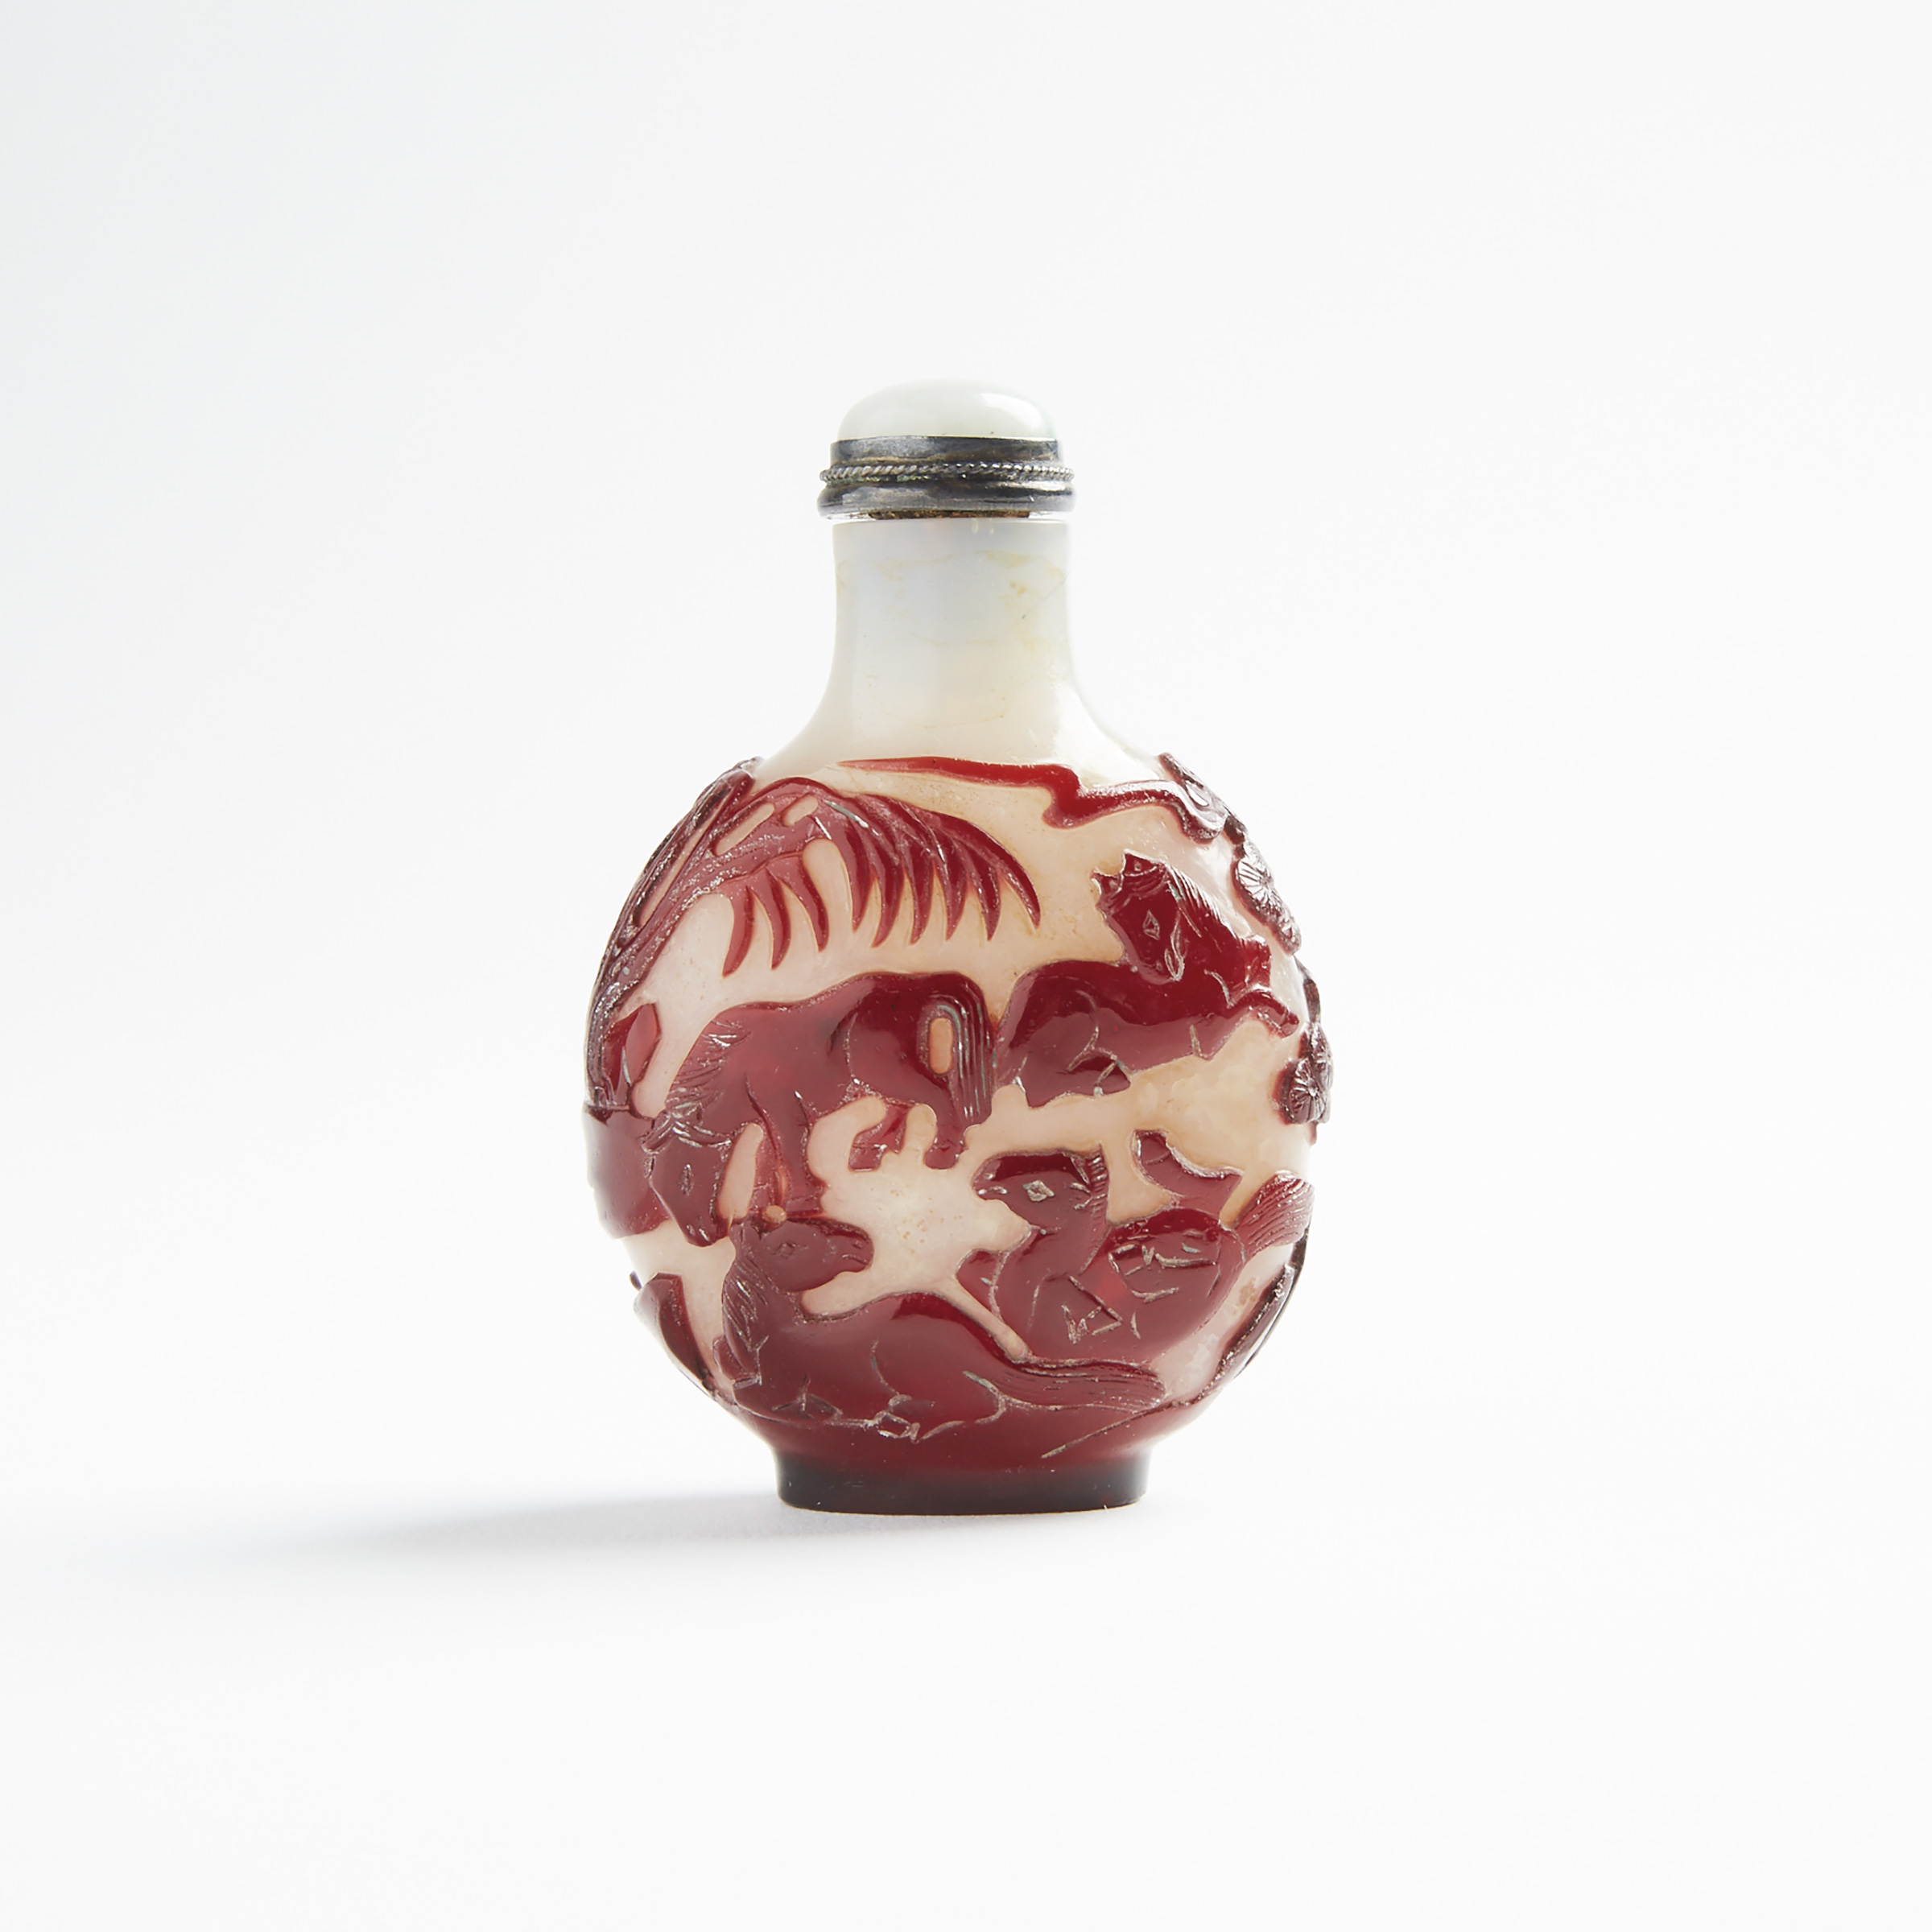 A Red Overlay 'Horses' Glass Snuff Bottle, 19th Century